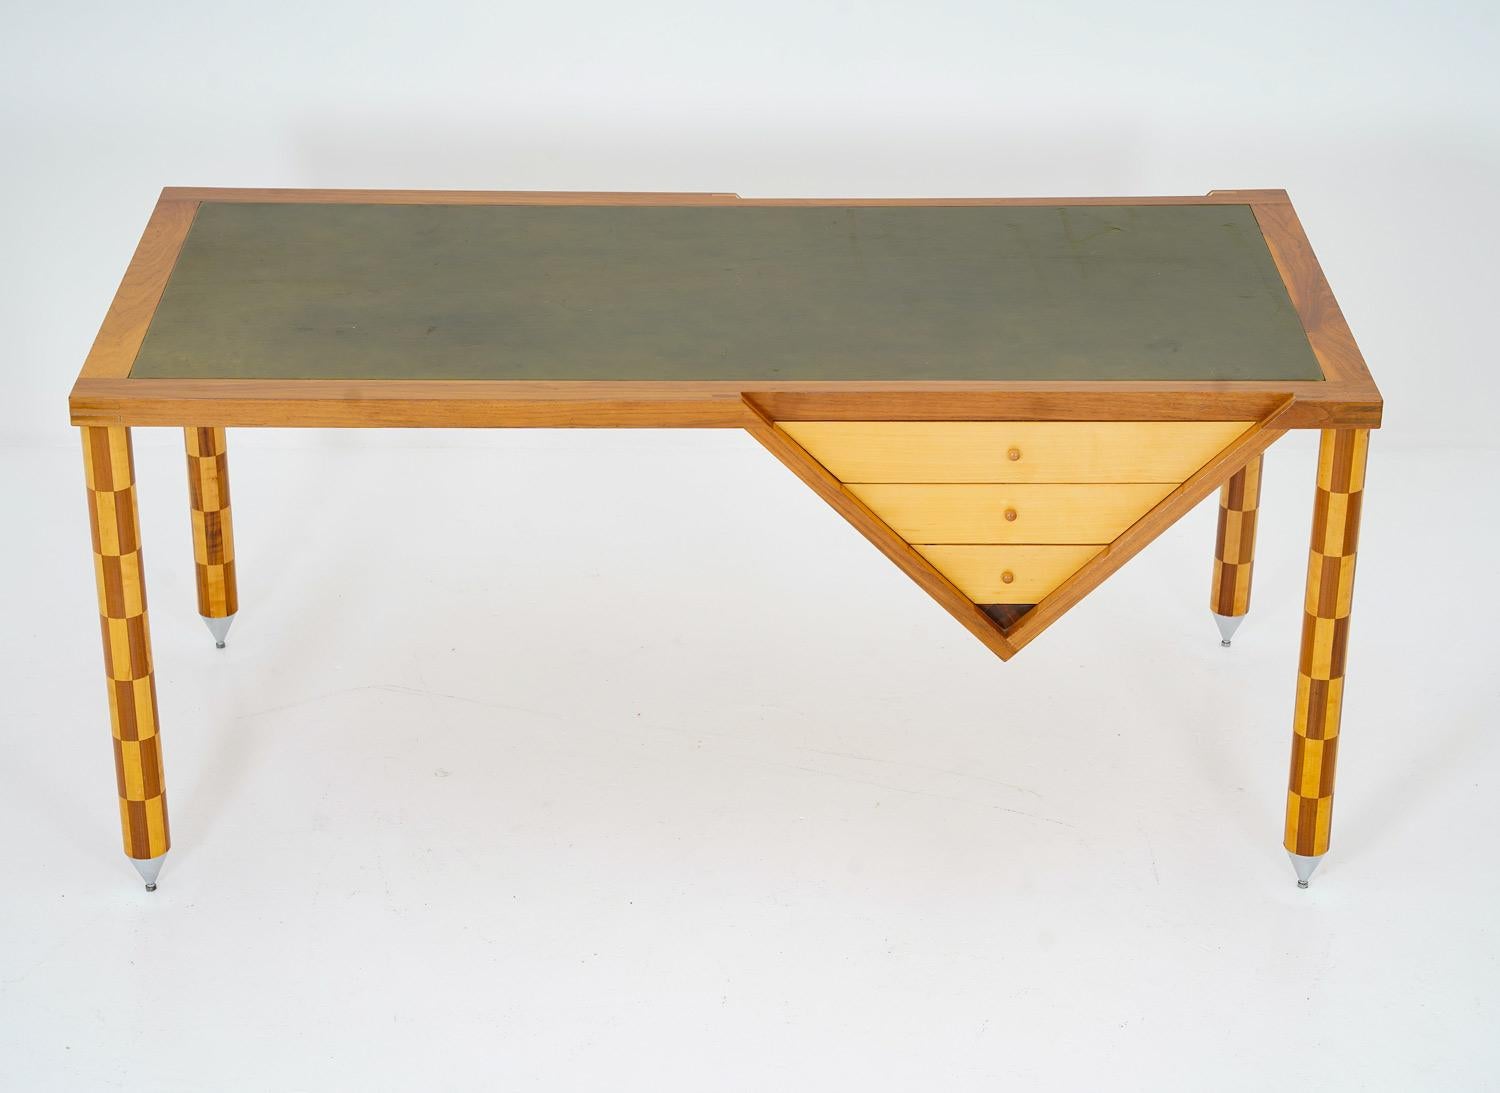 Incredible desk in wood and leather by Swedish cabinet maker, 1980s.
The desk consists of a tabletop covered with green leather. Three drawers, shaped like a triangle are integrated with the tabletop, combining design and functionality. The desk is